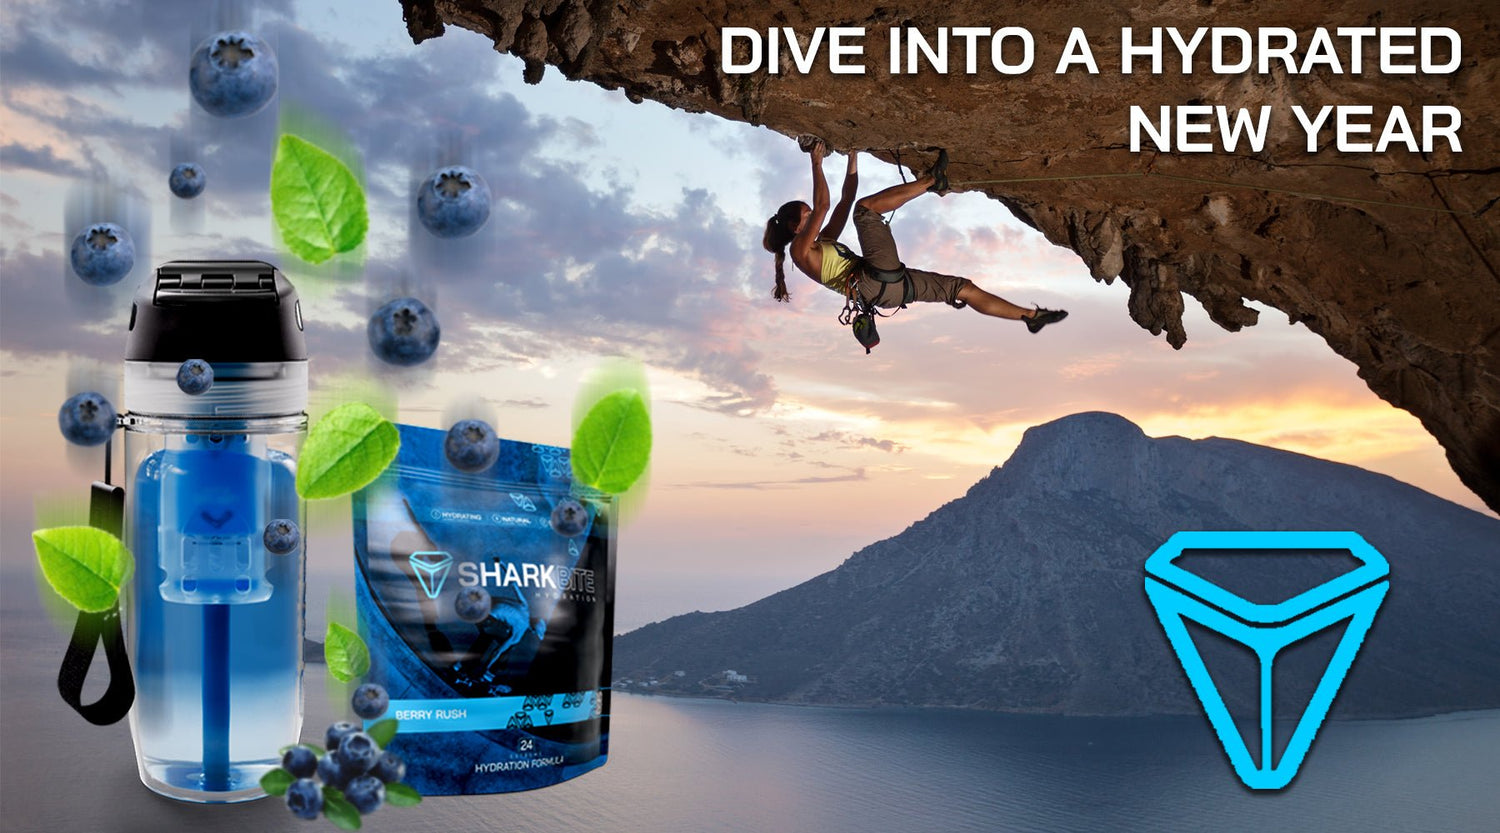 Dive into a Hydrated New Year with Sharkbite Hydration - SHARKBITE HYDRATION